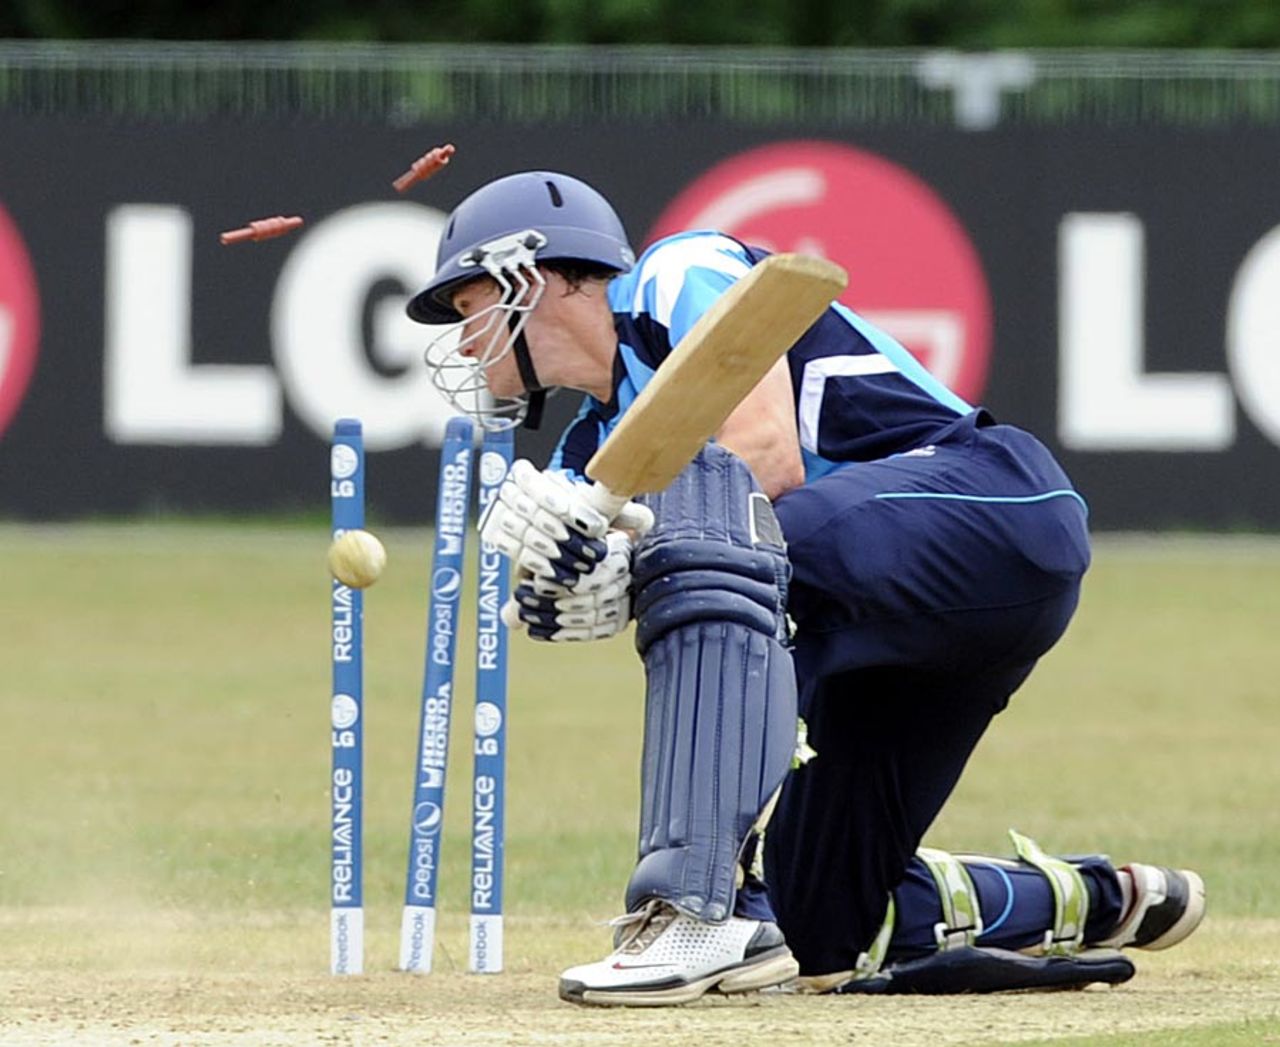 Richie Berrington scored a half-century before being bowled, Canada v Scotland, ICC WCL Division 1, Amstelveen, July 3 2010